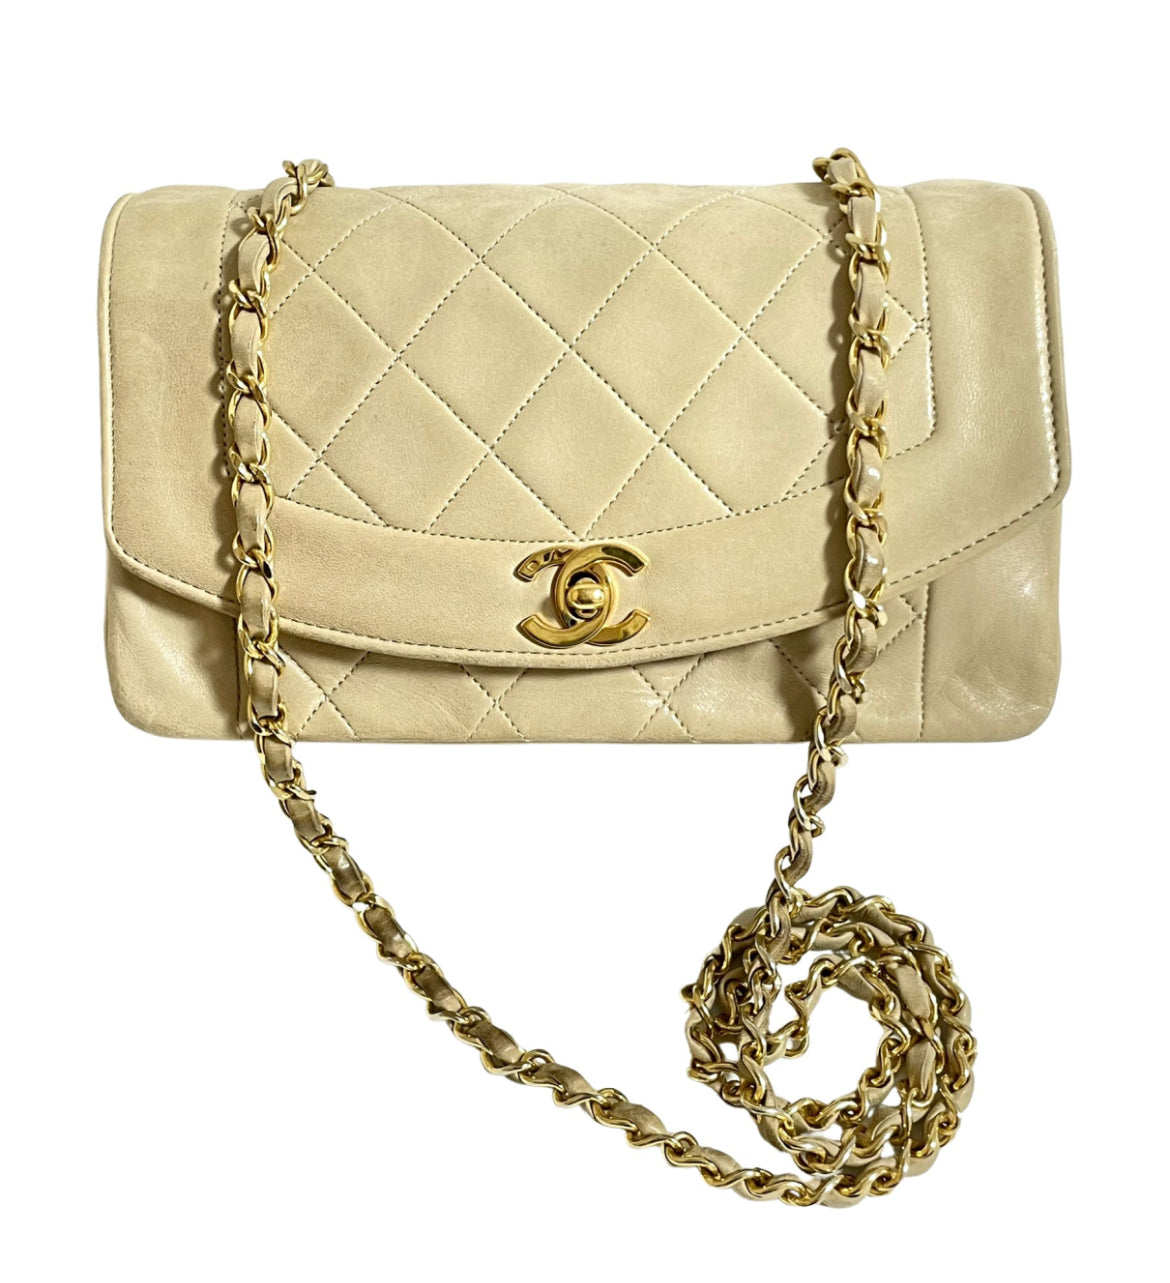 Buy Chanel Classic Flap Online In India -  India